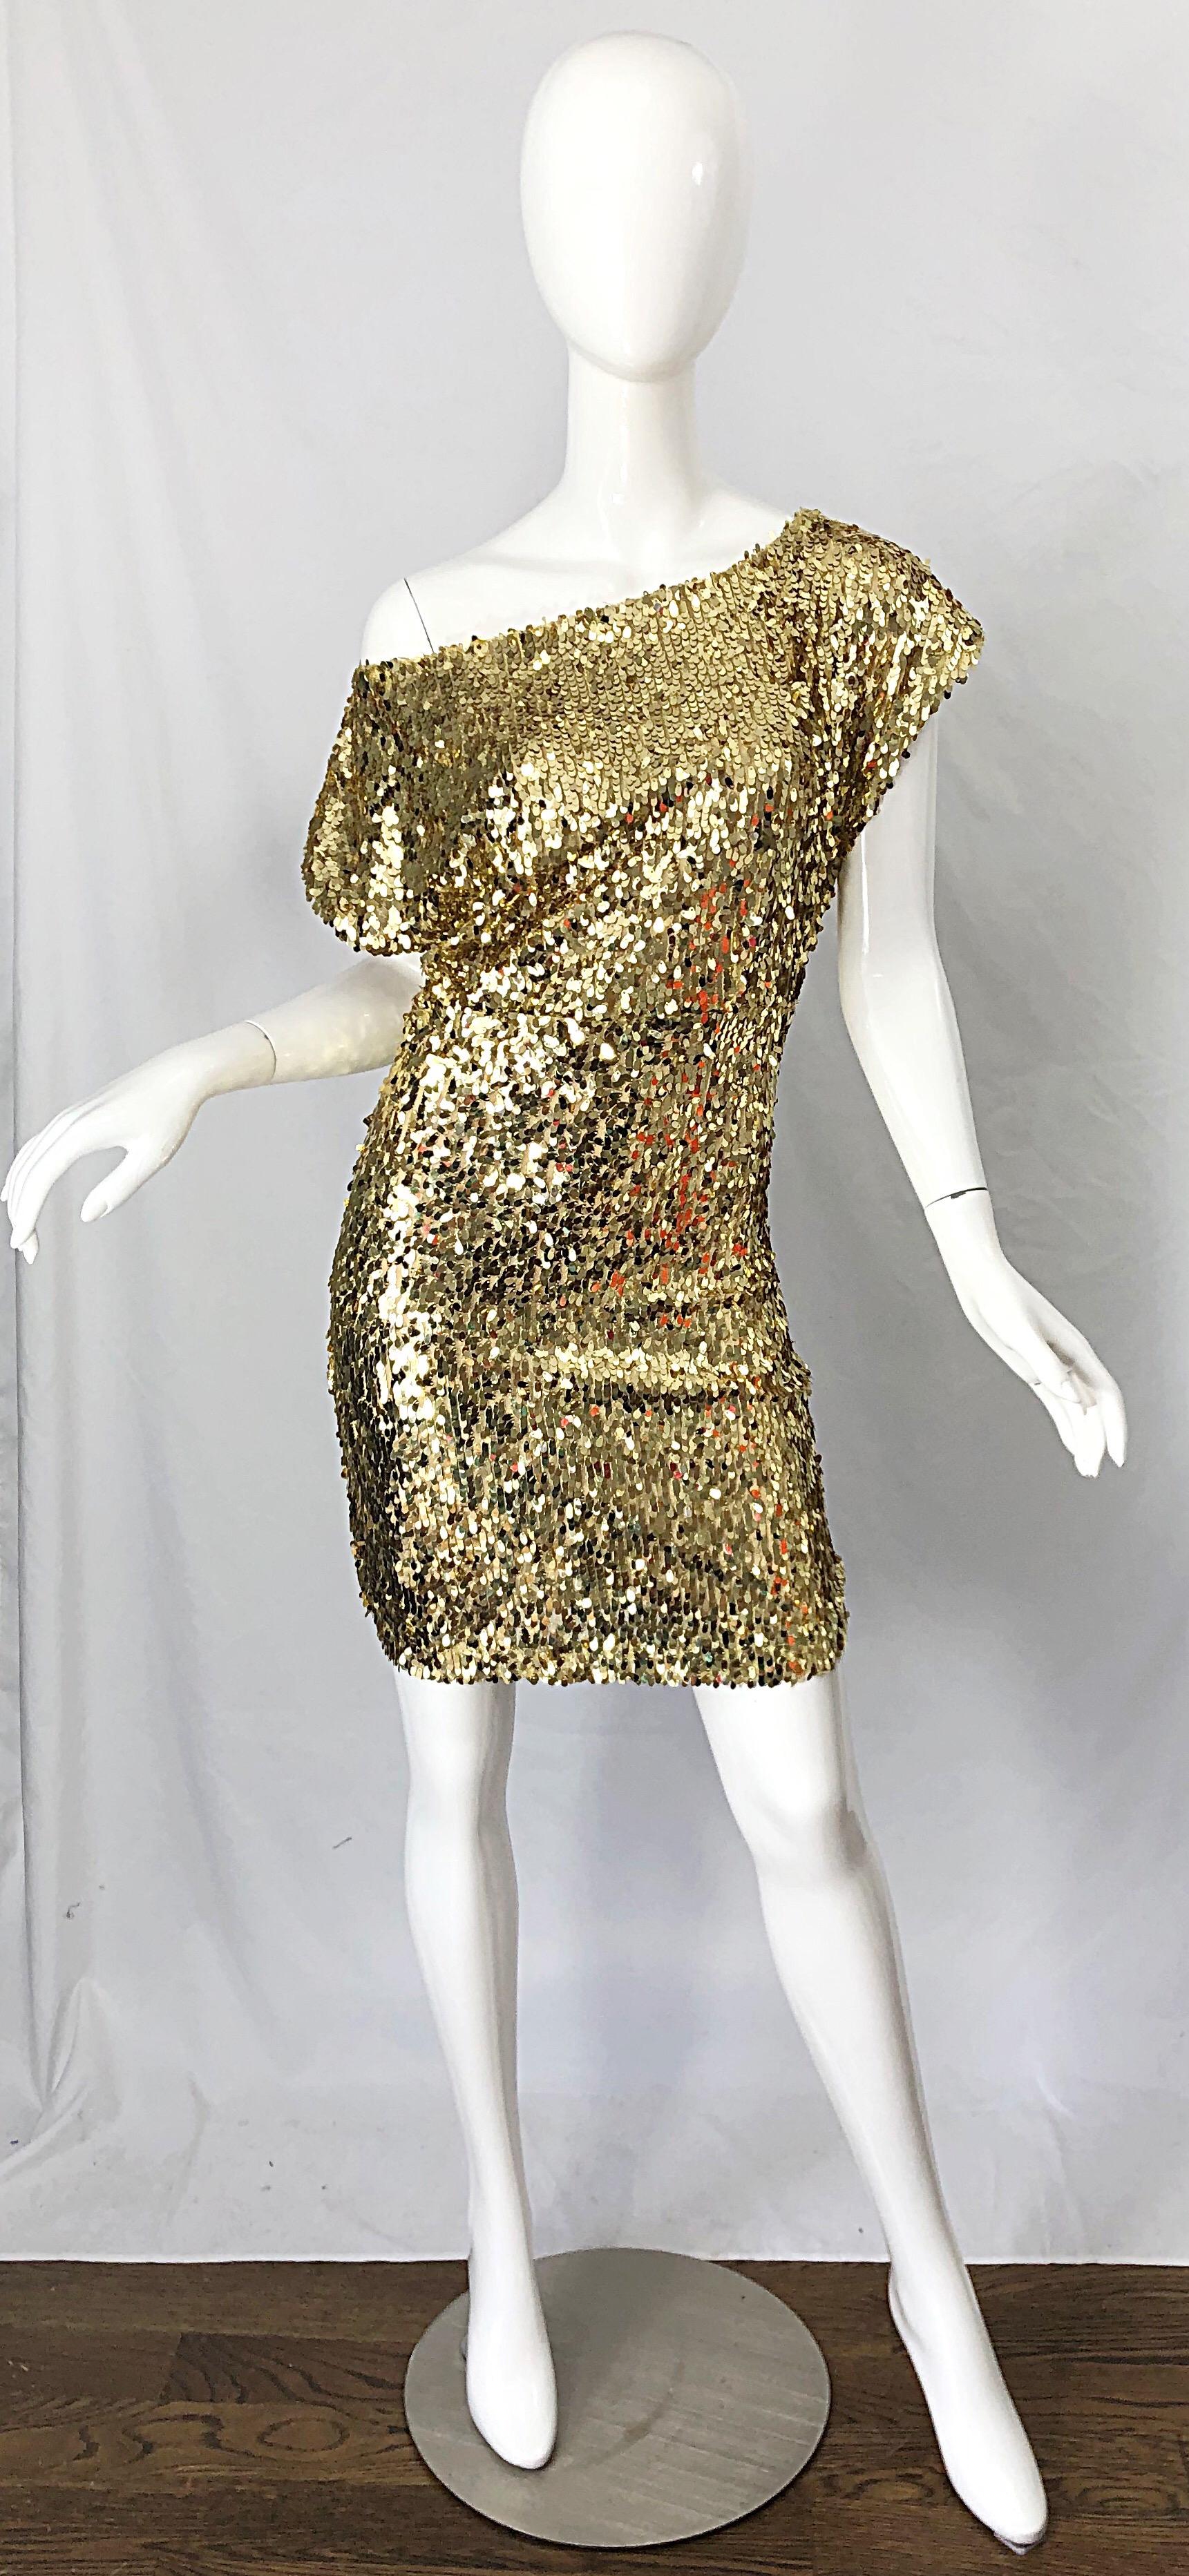 Sexy late 1990s Italian gold sequined off-the-shoulder dress ! Features thousands of hand-sewn sequins throughout the entire dress. Can be worn many ways ( as pictured ). Hidden zipper up the side with hook-and-eye closure. Perfect with sandals or